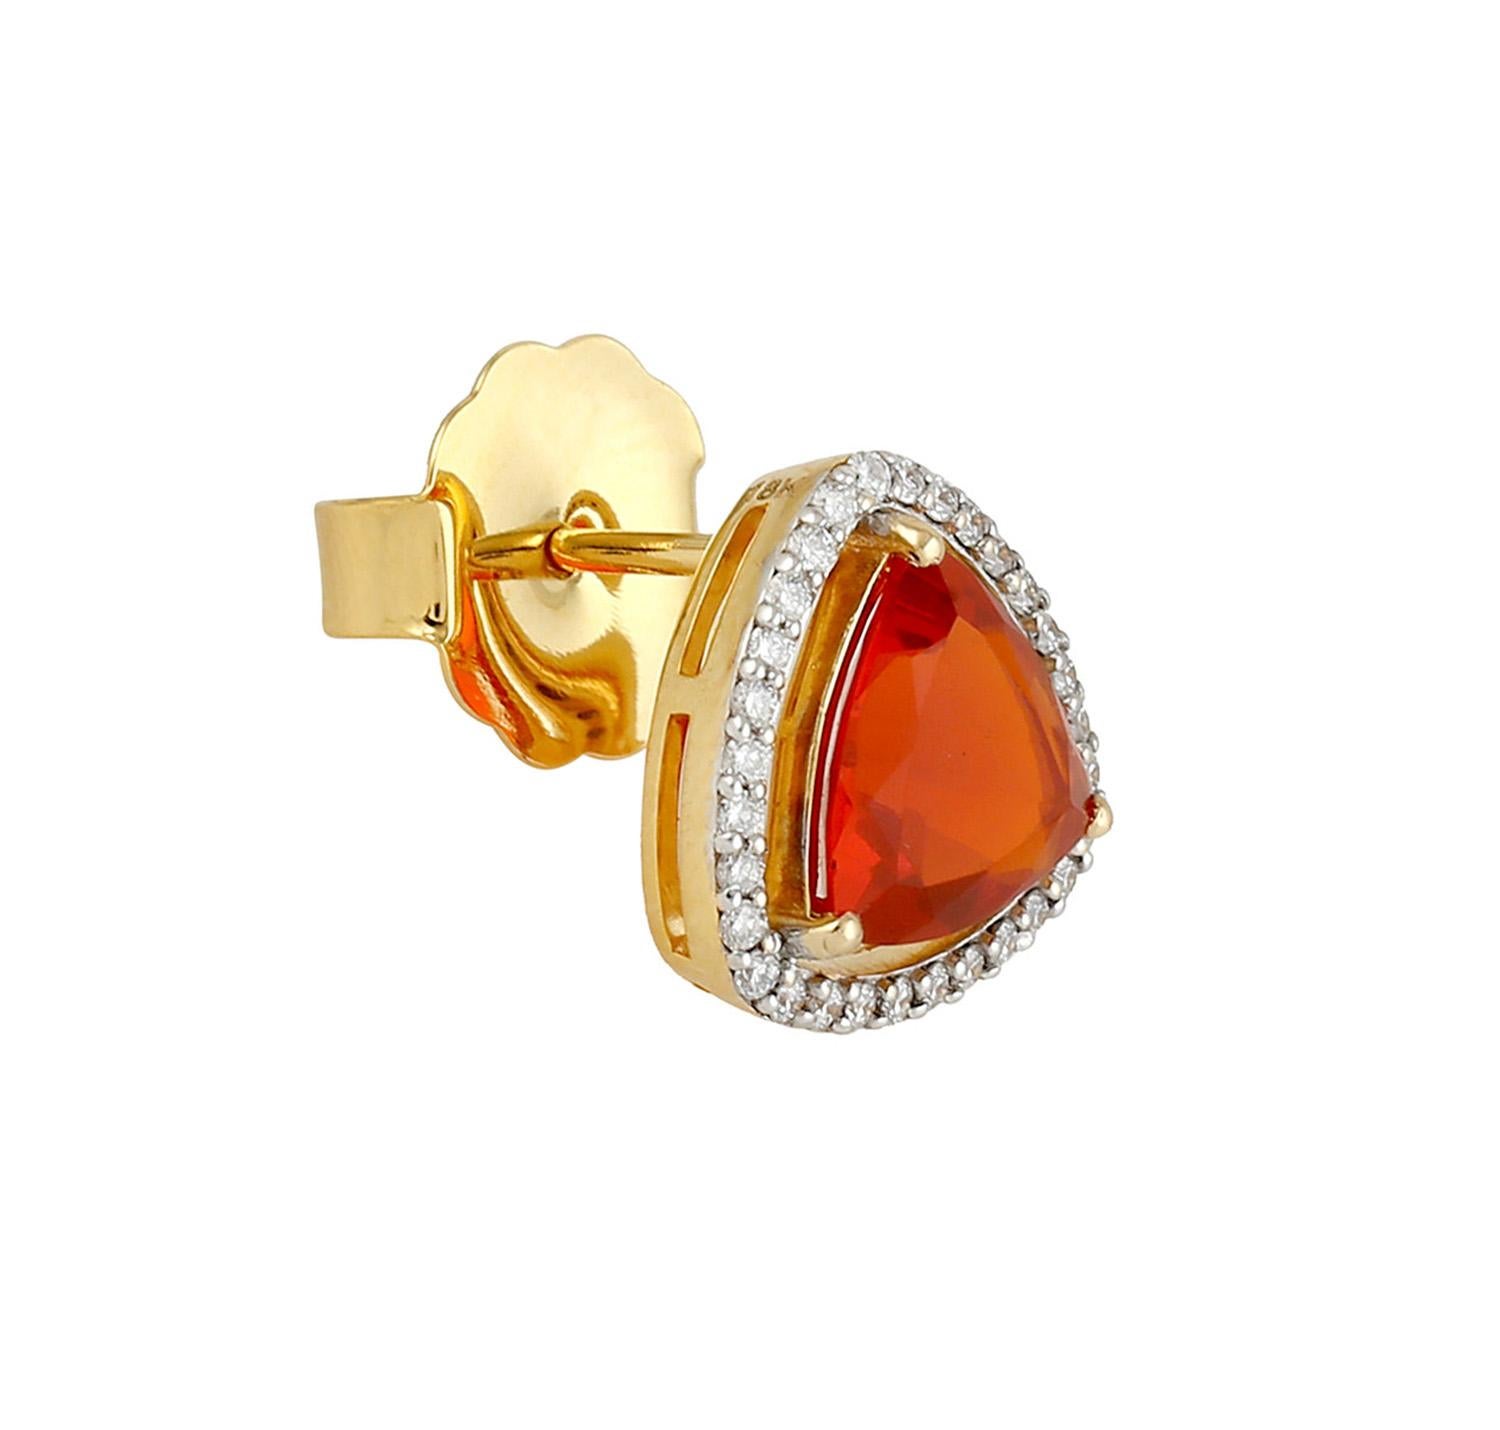 Natural Fire Opal And Diamond Stud Earrings 18K Yellow Gold 1